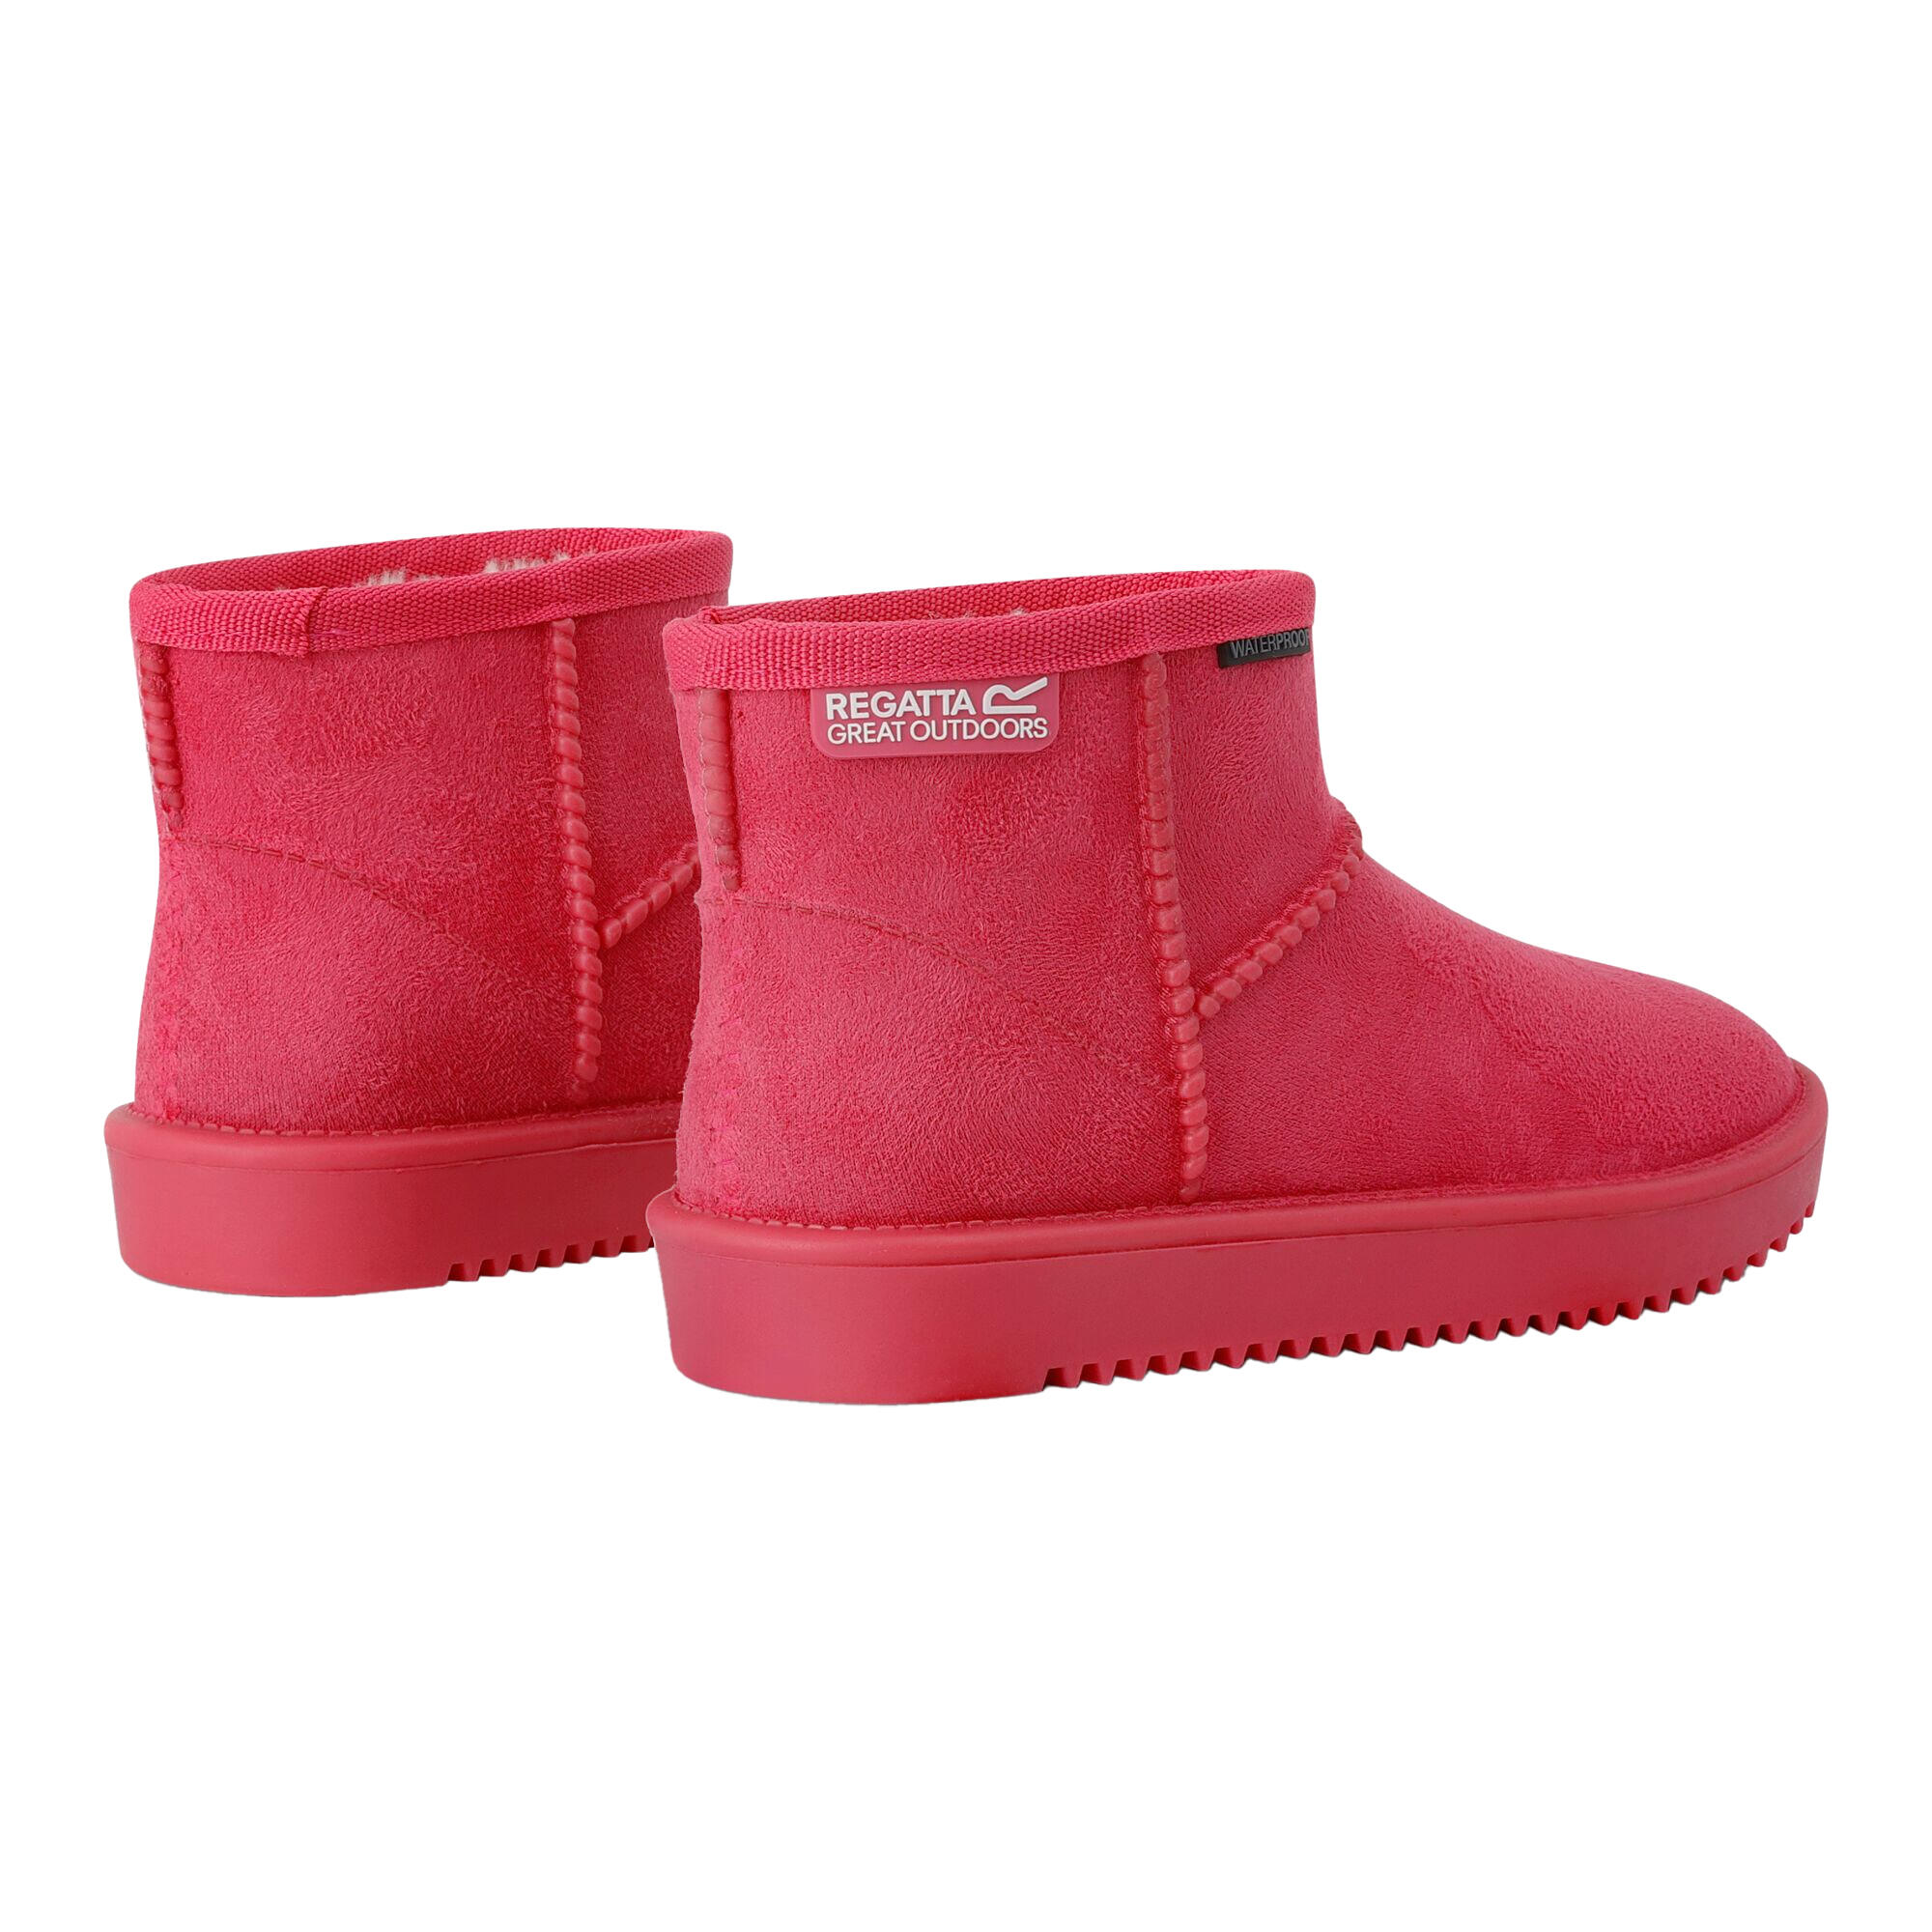 Childrens/Kids Risely Faux Fur Lined Waterproof Snow Boots (Pink Potion) 2/5